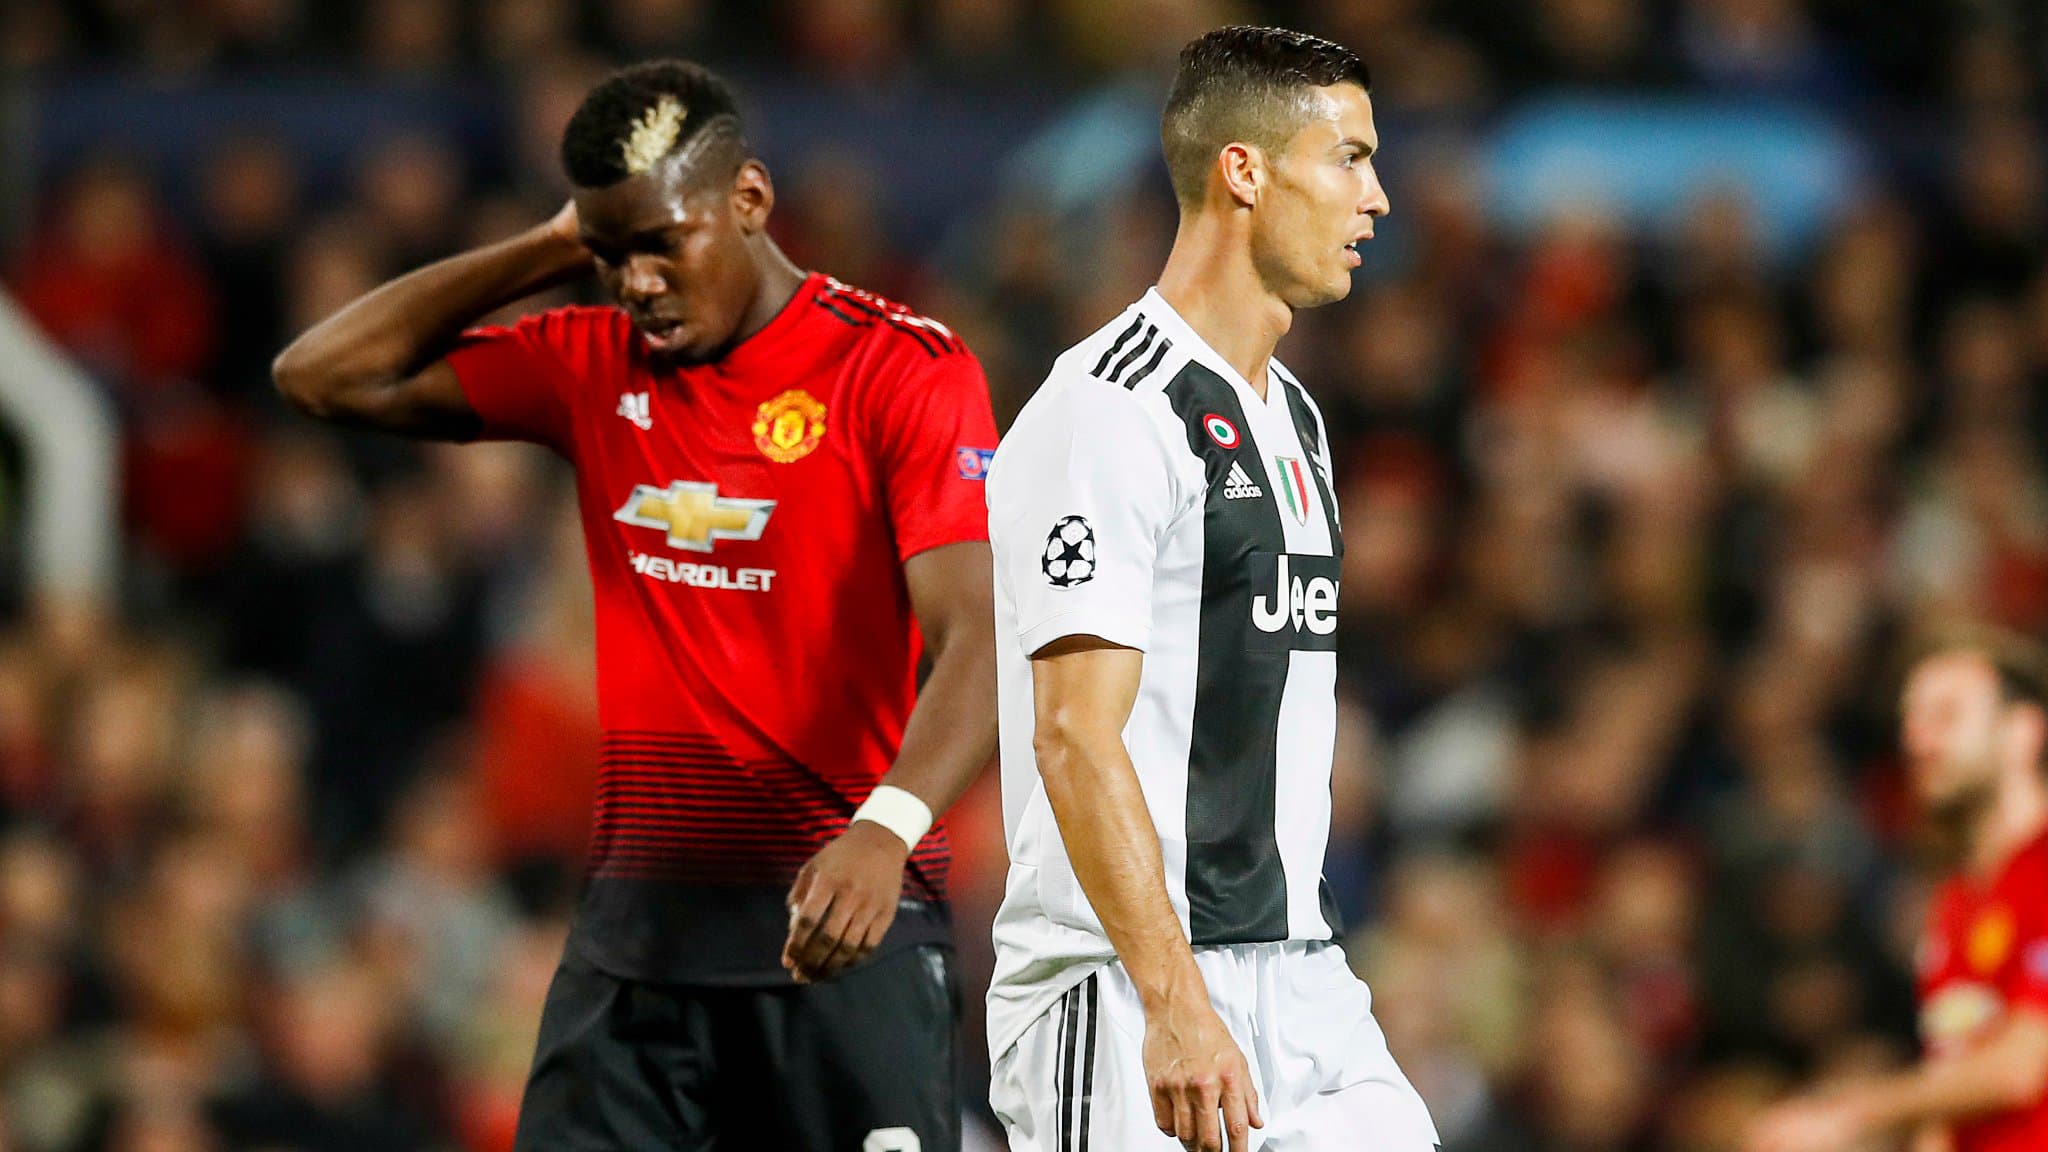 Will Ronaldo and Pogba face sanctions for their recent behavior?